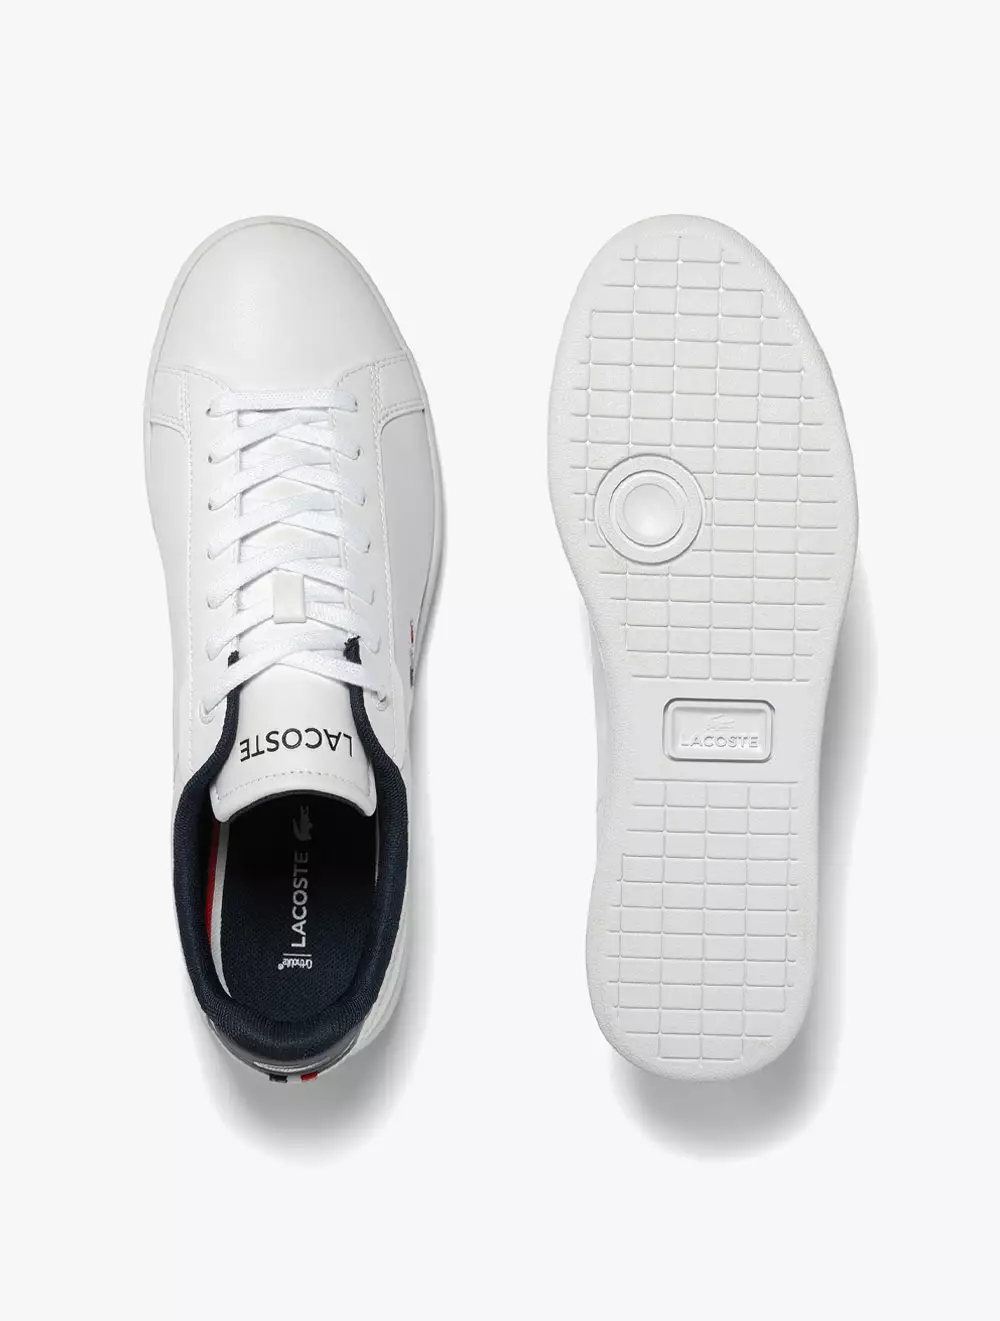 Jual Lacoste Men's Lacoste Carnaby Pro Leather Tricolour Trainers ...